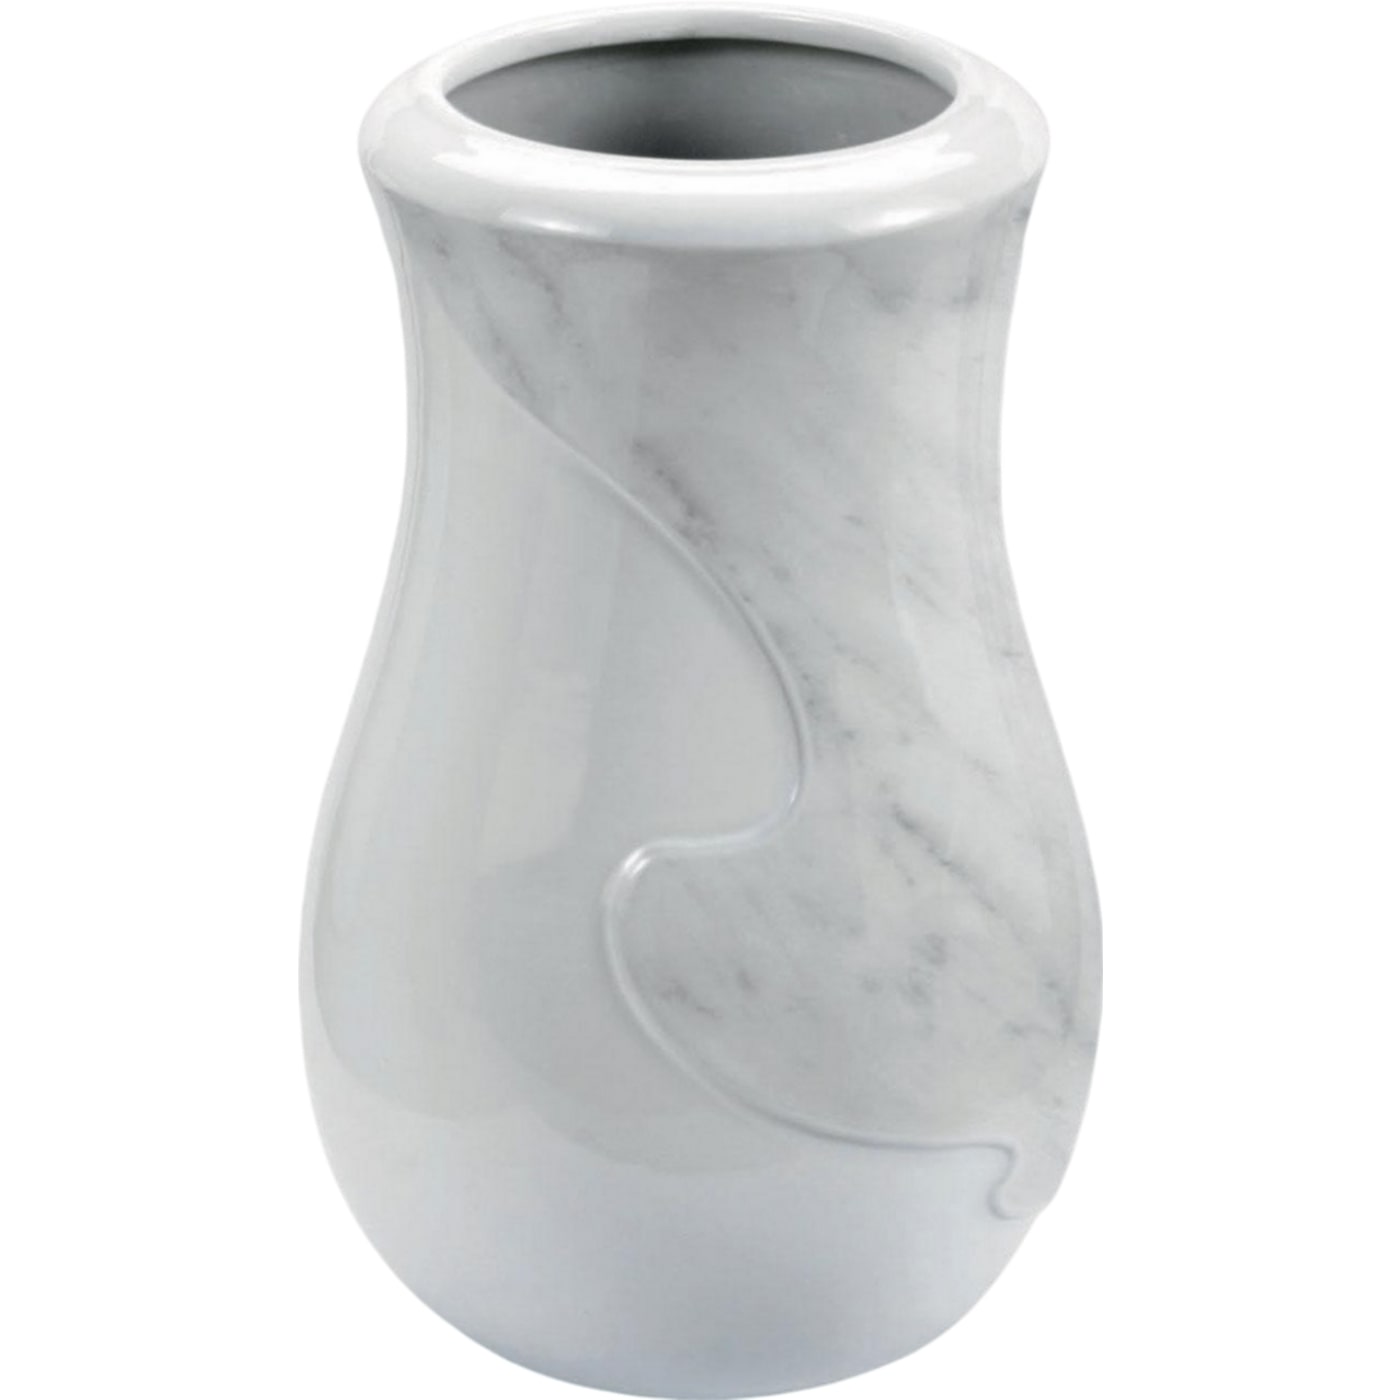 Grave vase Anna carrara 21x13cm - 8.3x5.1in In white porcelain with carrara decoration, ground attached ANN134T/CARR